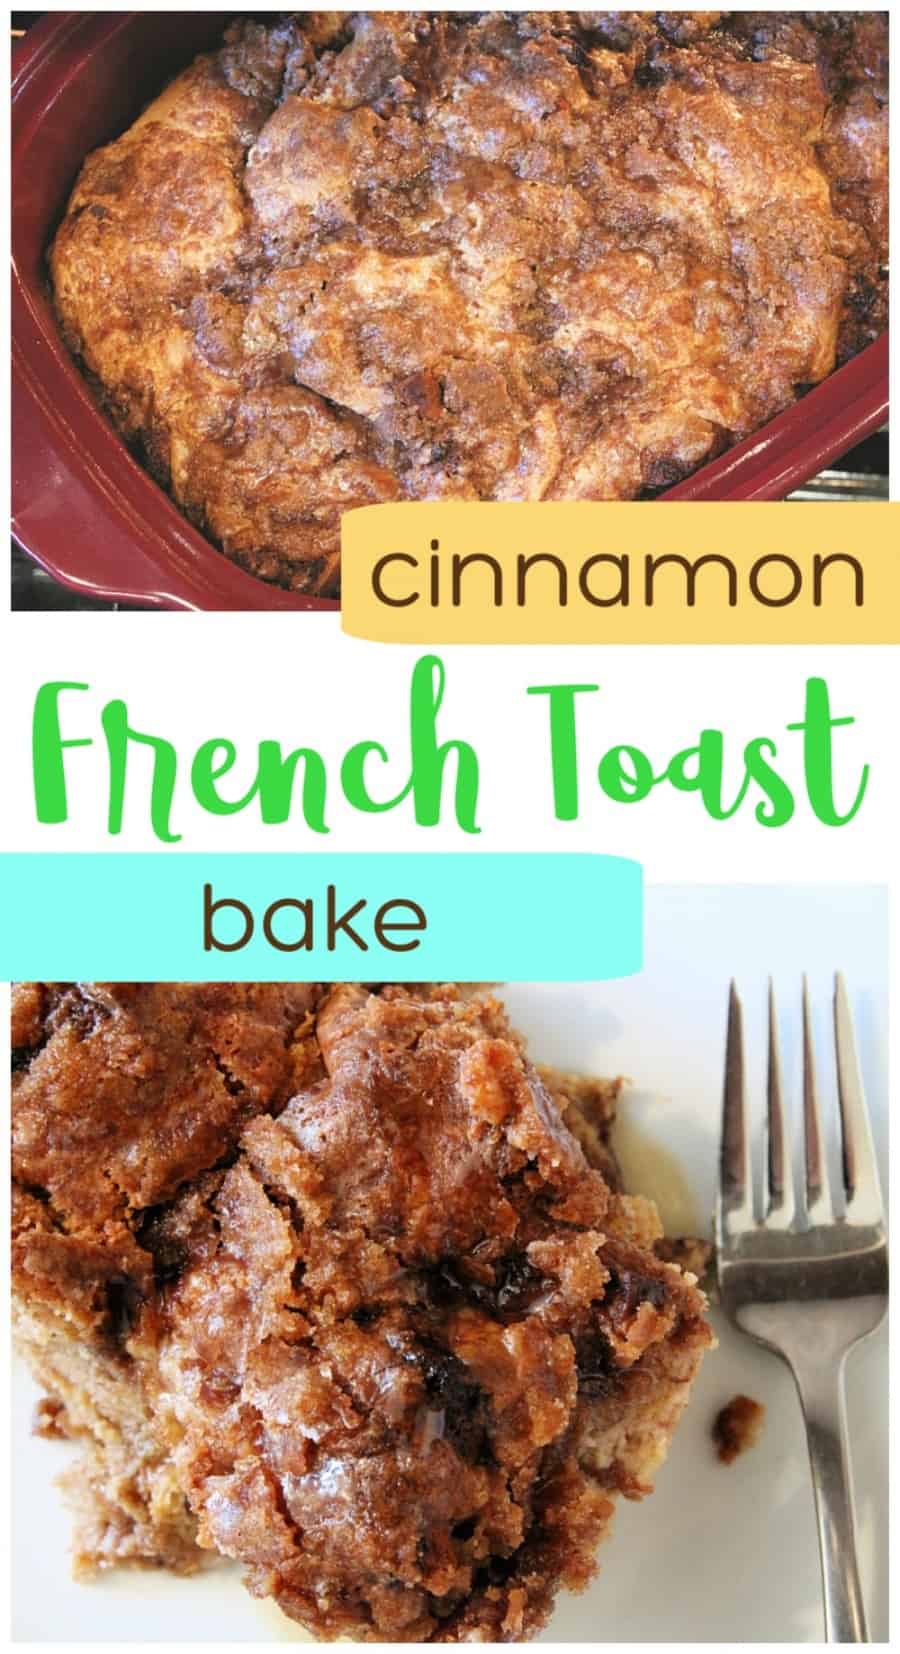 FRESH BAKED cinnamon FRENCH TOAST Bake {RECIPE} - This oven baked favorite is a crowd pleaser!